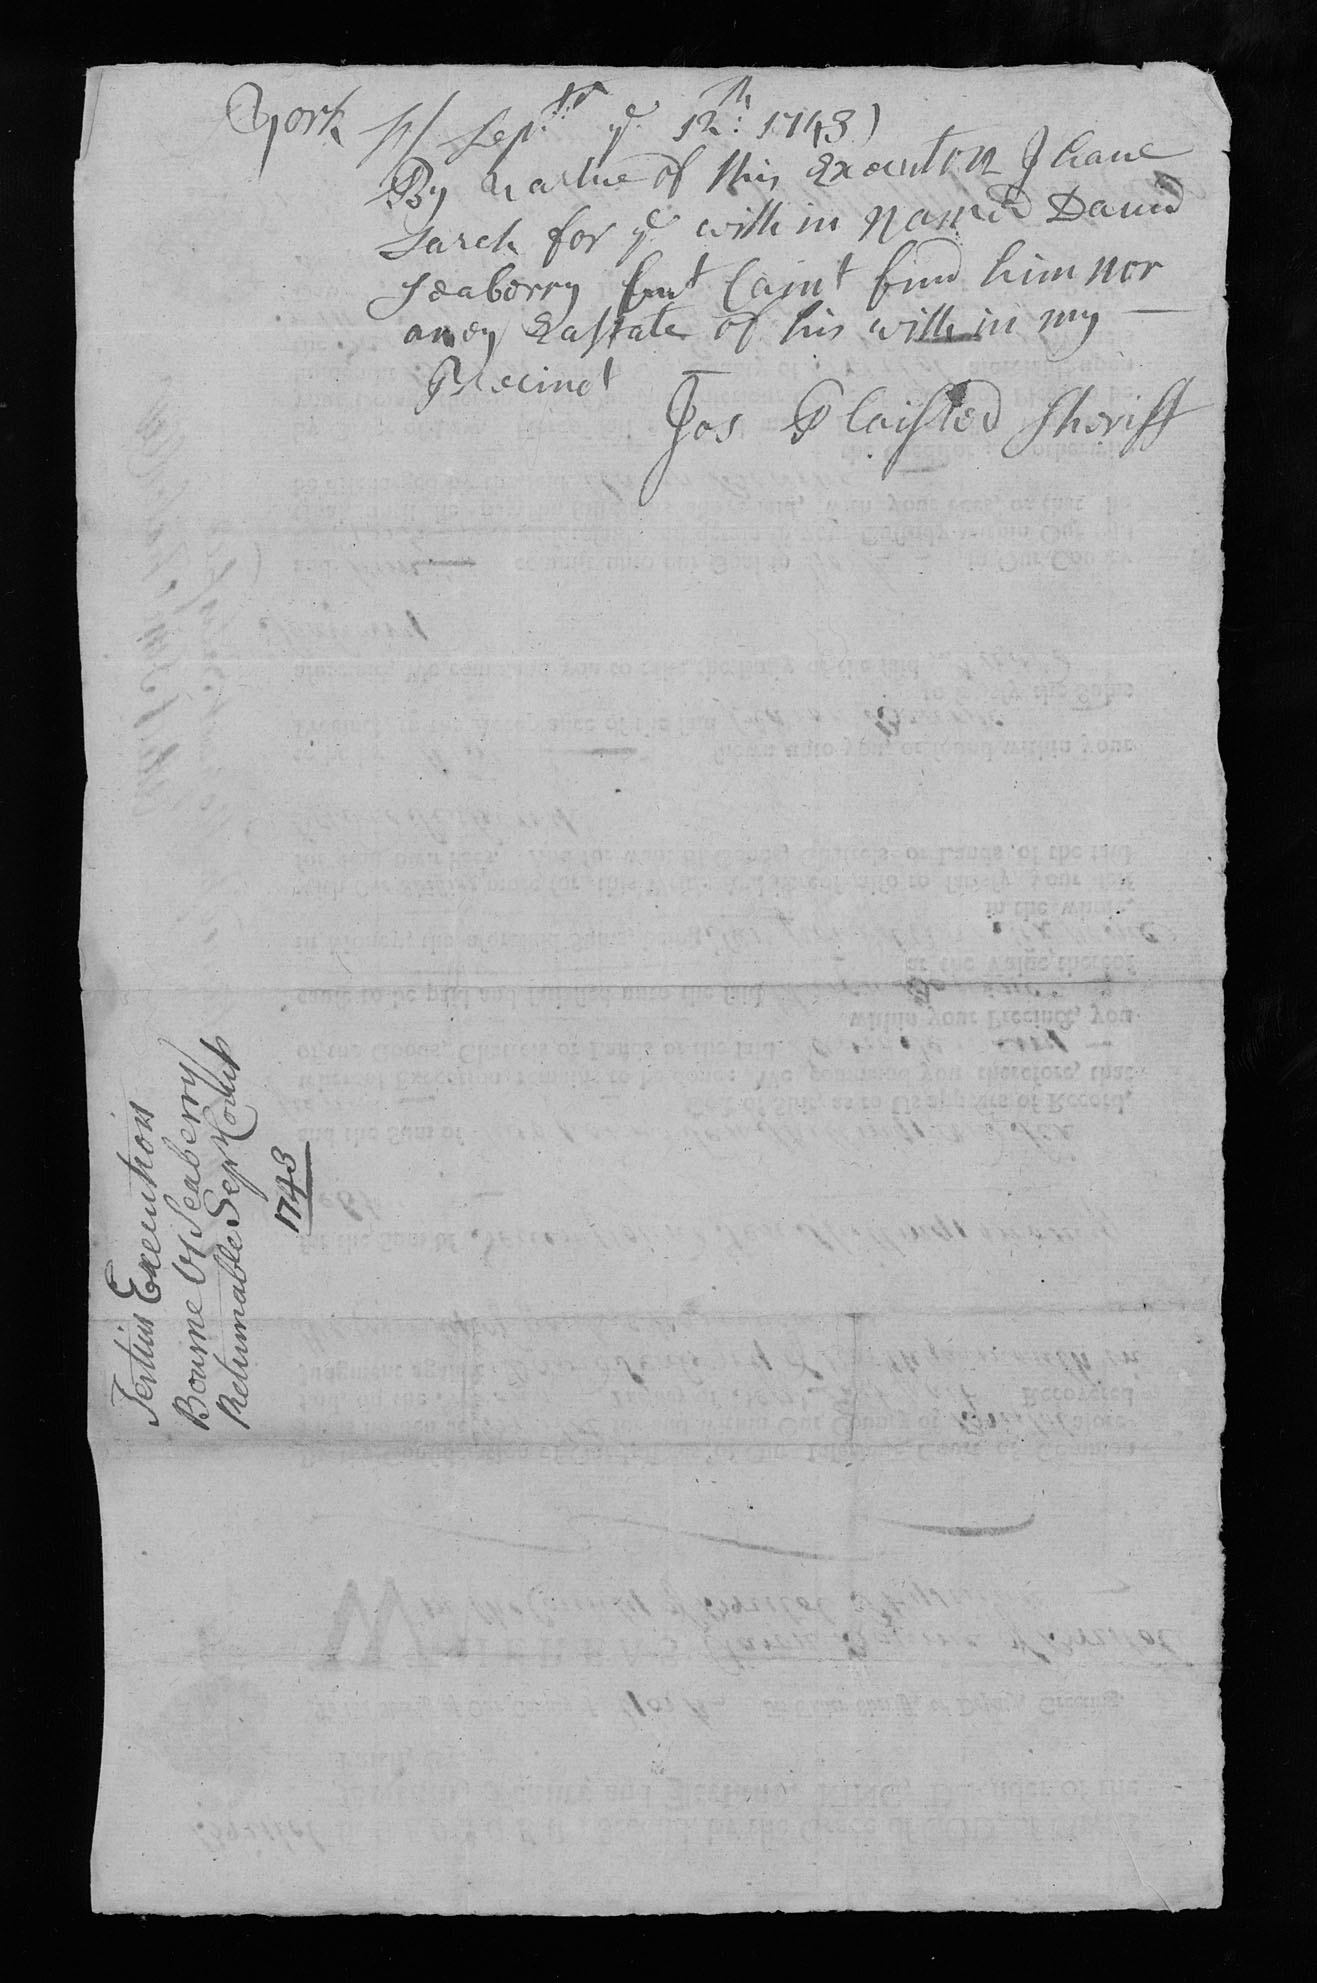 Timothy Fales, Joseph Glaistead, "Write of execution against David Seaberry," Verso